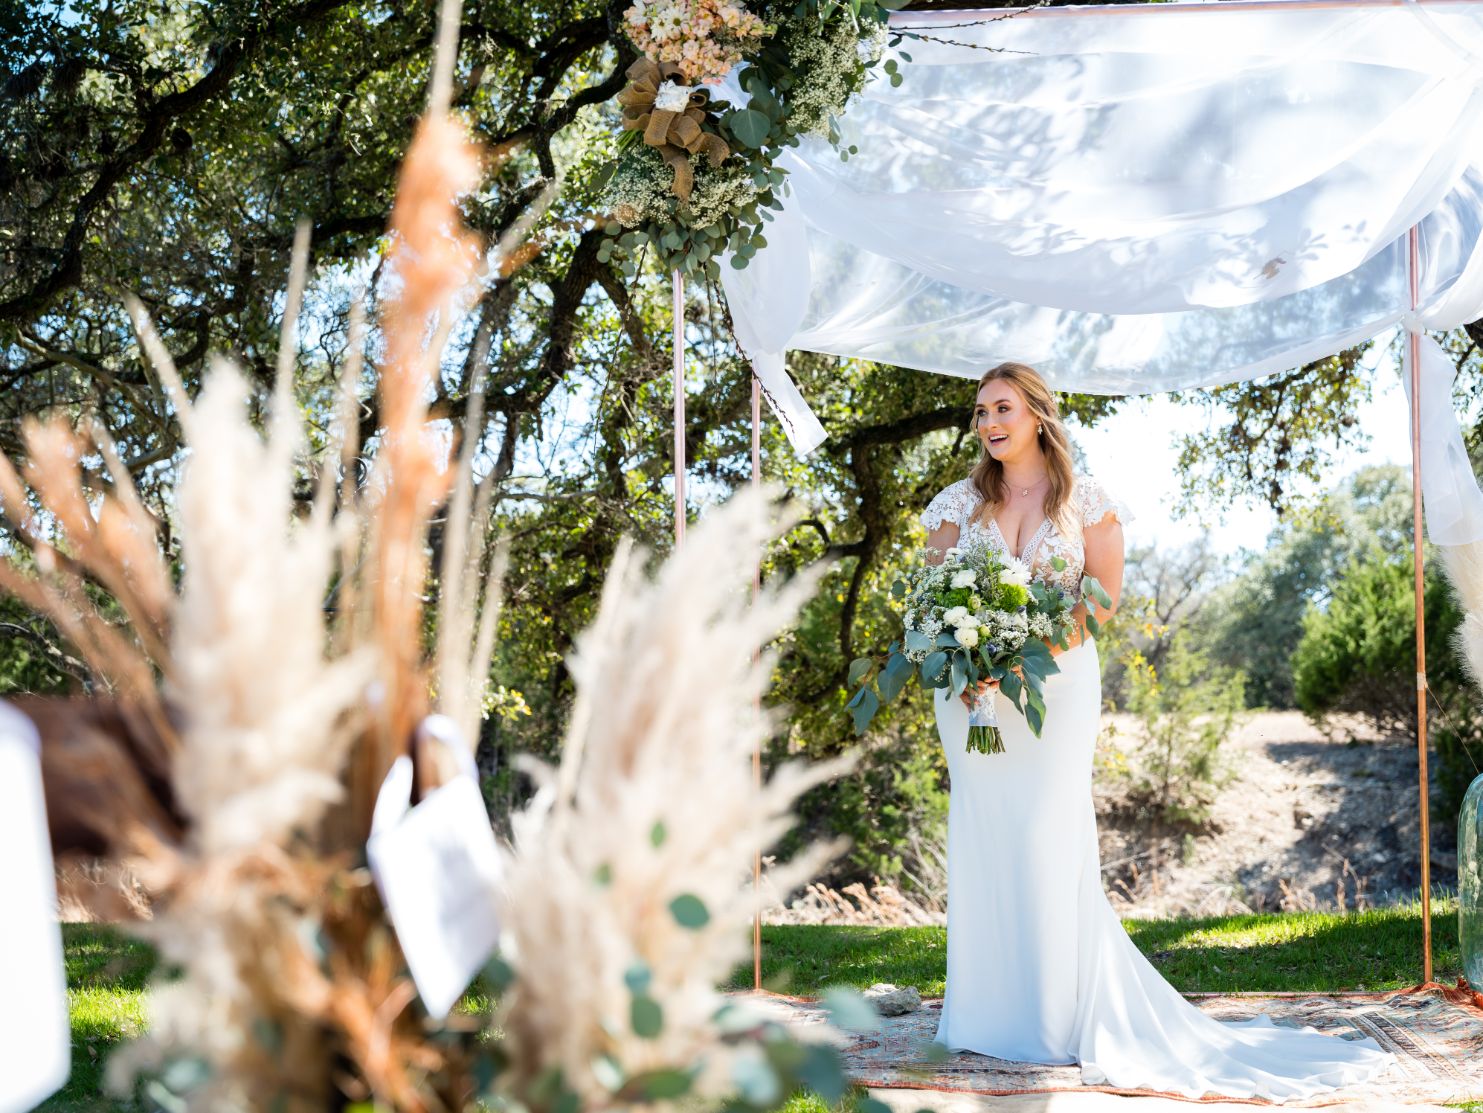 Bridre is holding a bouquet of white and green flowers as she stands under and wedding altar with a white sheet blowing in the wind above her. 